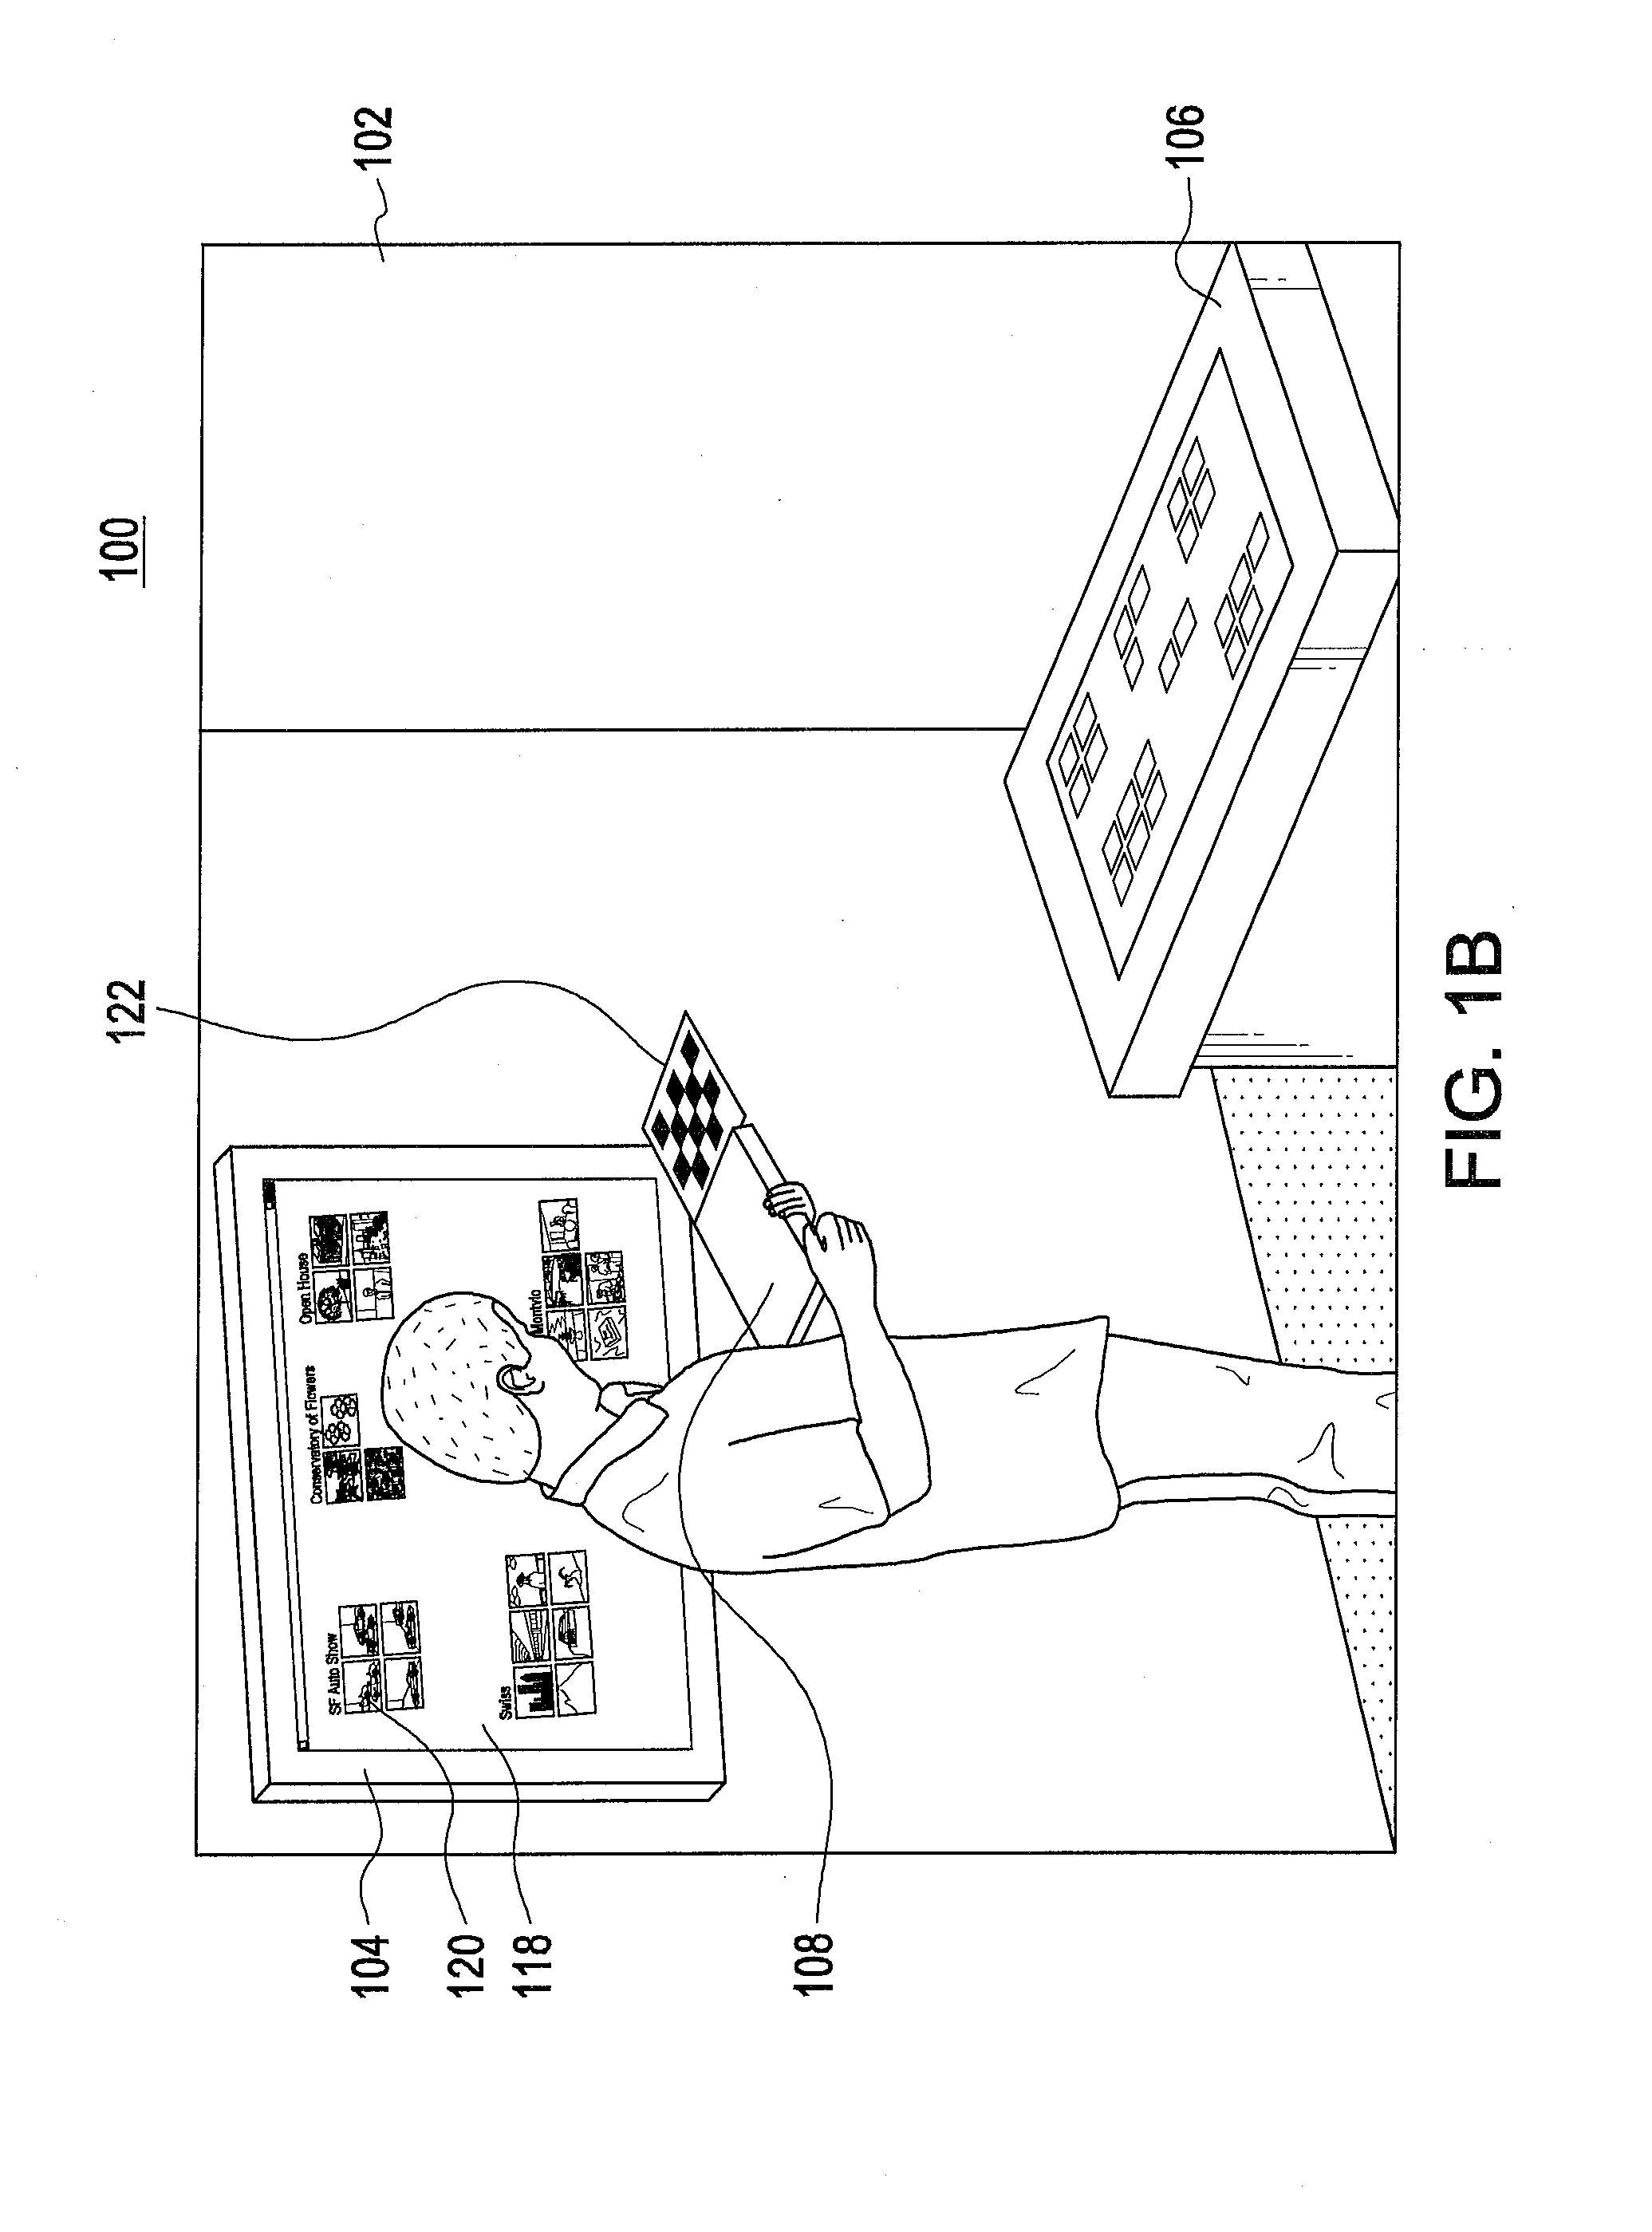 Systems and methods for information visualization in multi-display environments